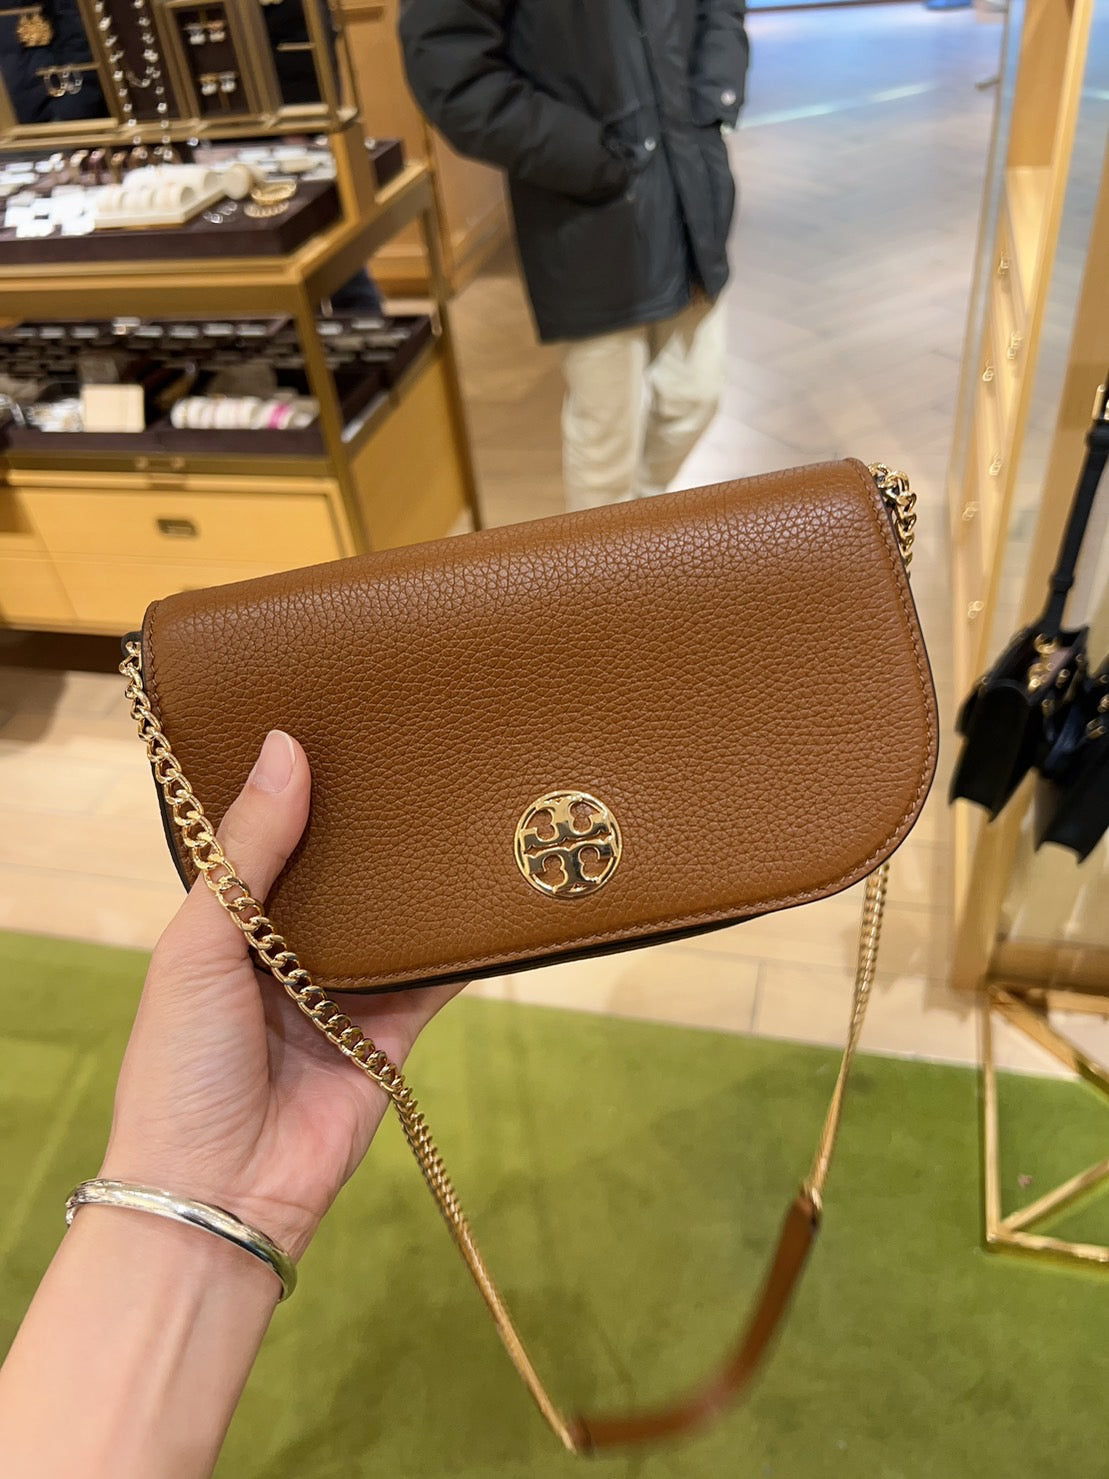 🇺🇲✨Shopping from Tory Burch in the United States is 100% authentic |  Pre-order from mid-to-end of January (note the color by yourself)